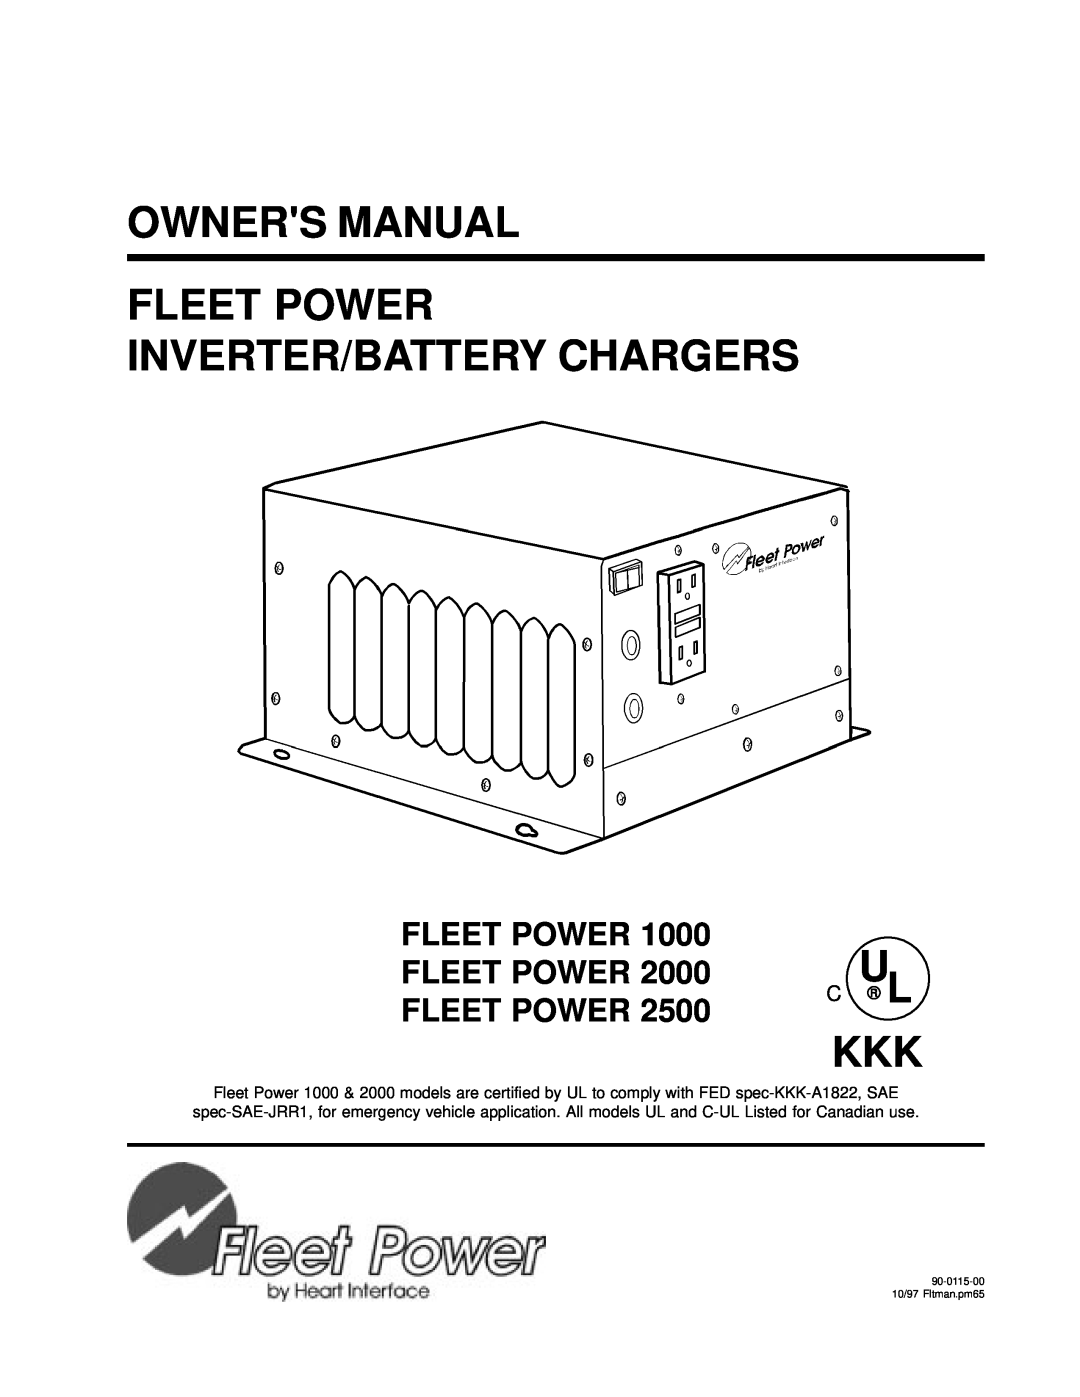 Xantrex Technology 2500 warranty Fleet Power, Xantrex Technology Inc, Product Features, Protection Features, Accessories 